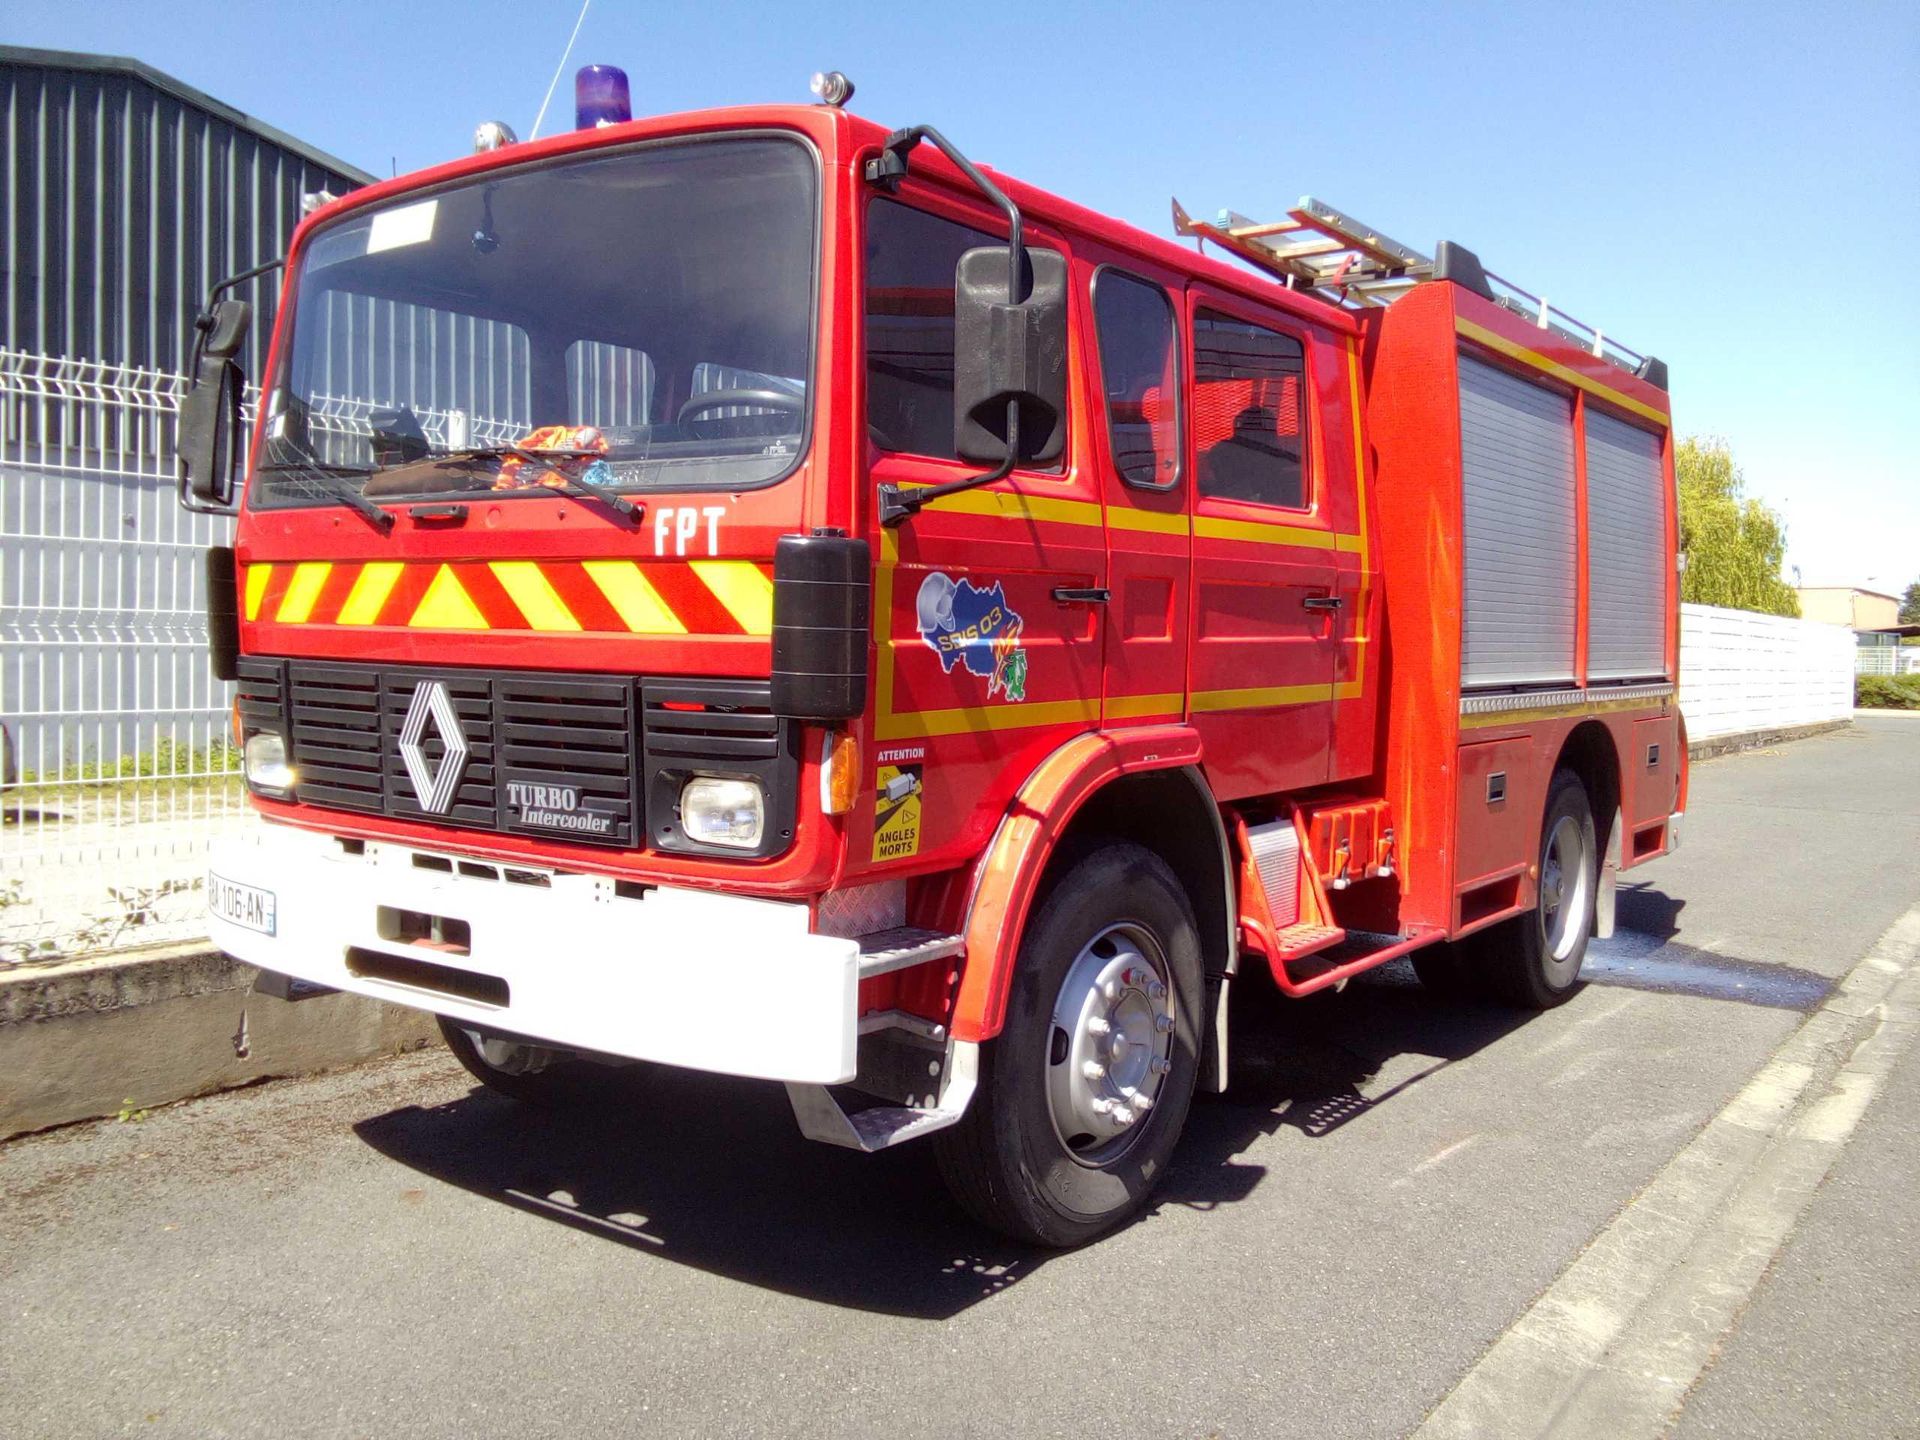 Null [RP][CT] Reserved for professionals.
Fire truck RENAULT S170 Turbo Intercoo&hellip;